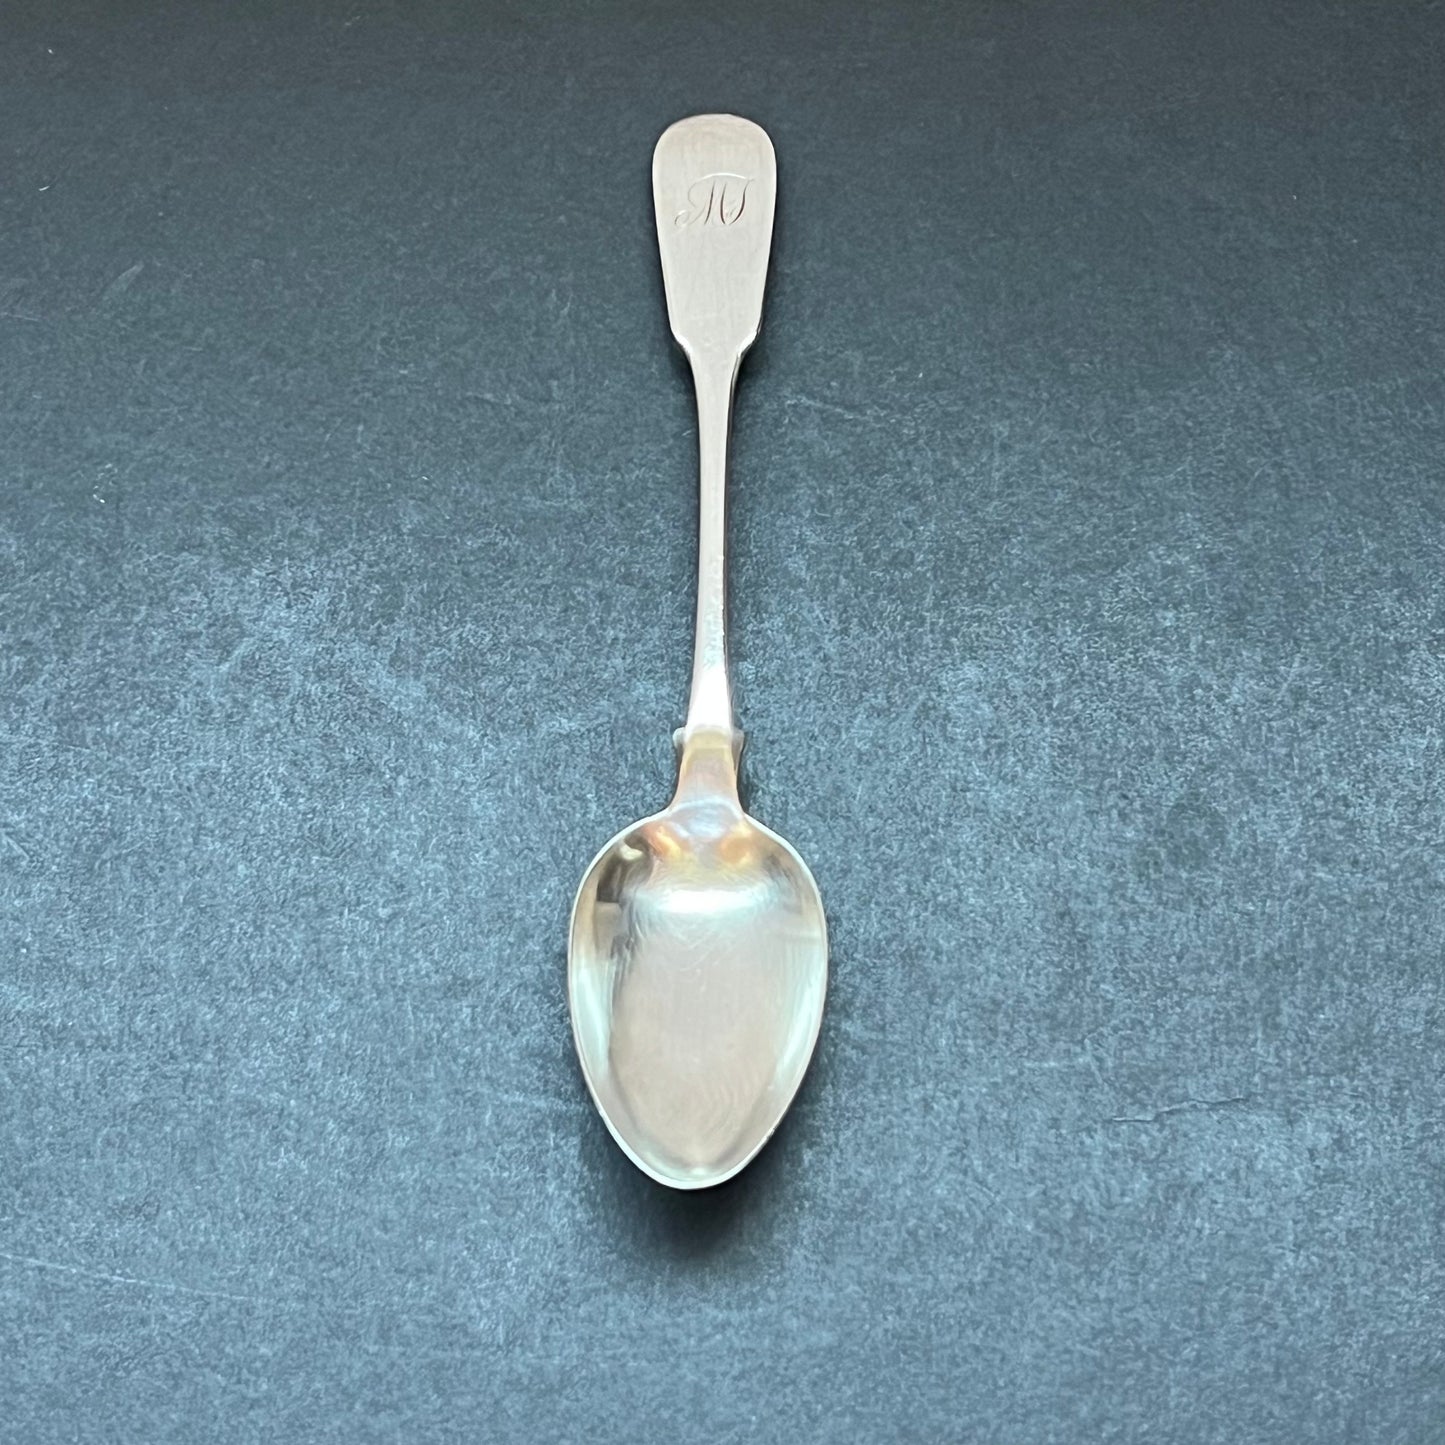 Pair of 2 early Victorian provincial silver sterling silver spoons, John Menzies, 1839 and 1840, Glasgow